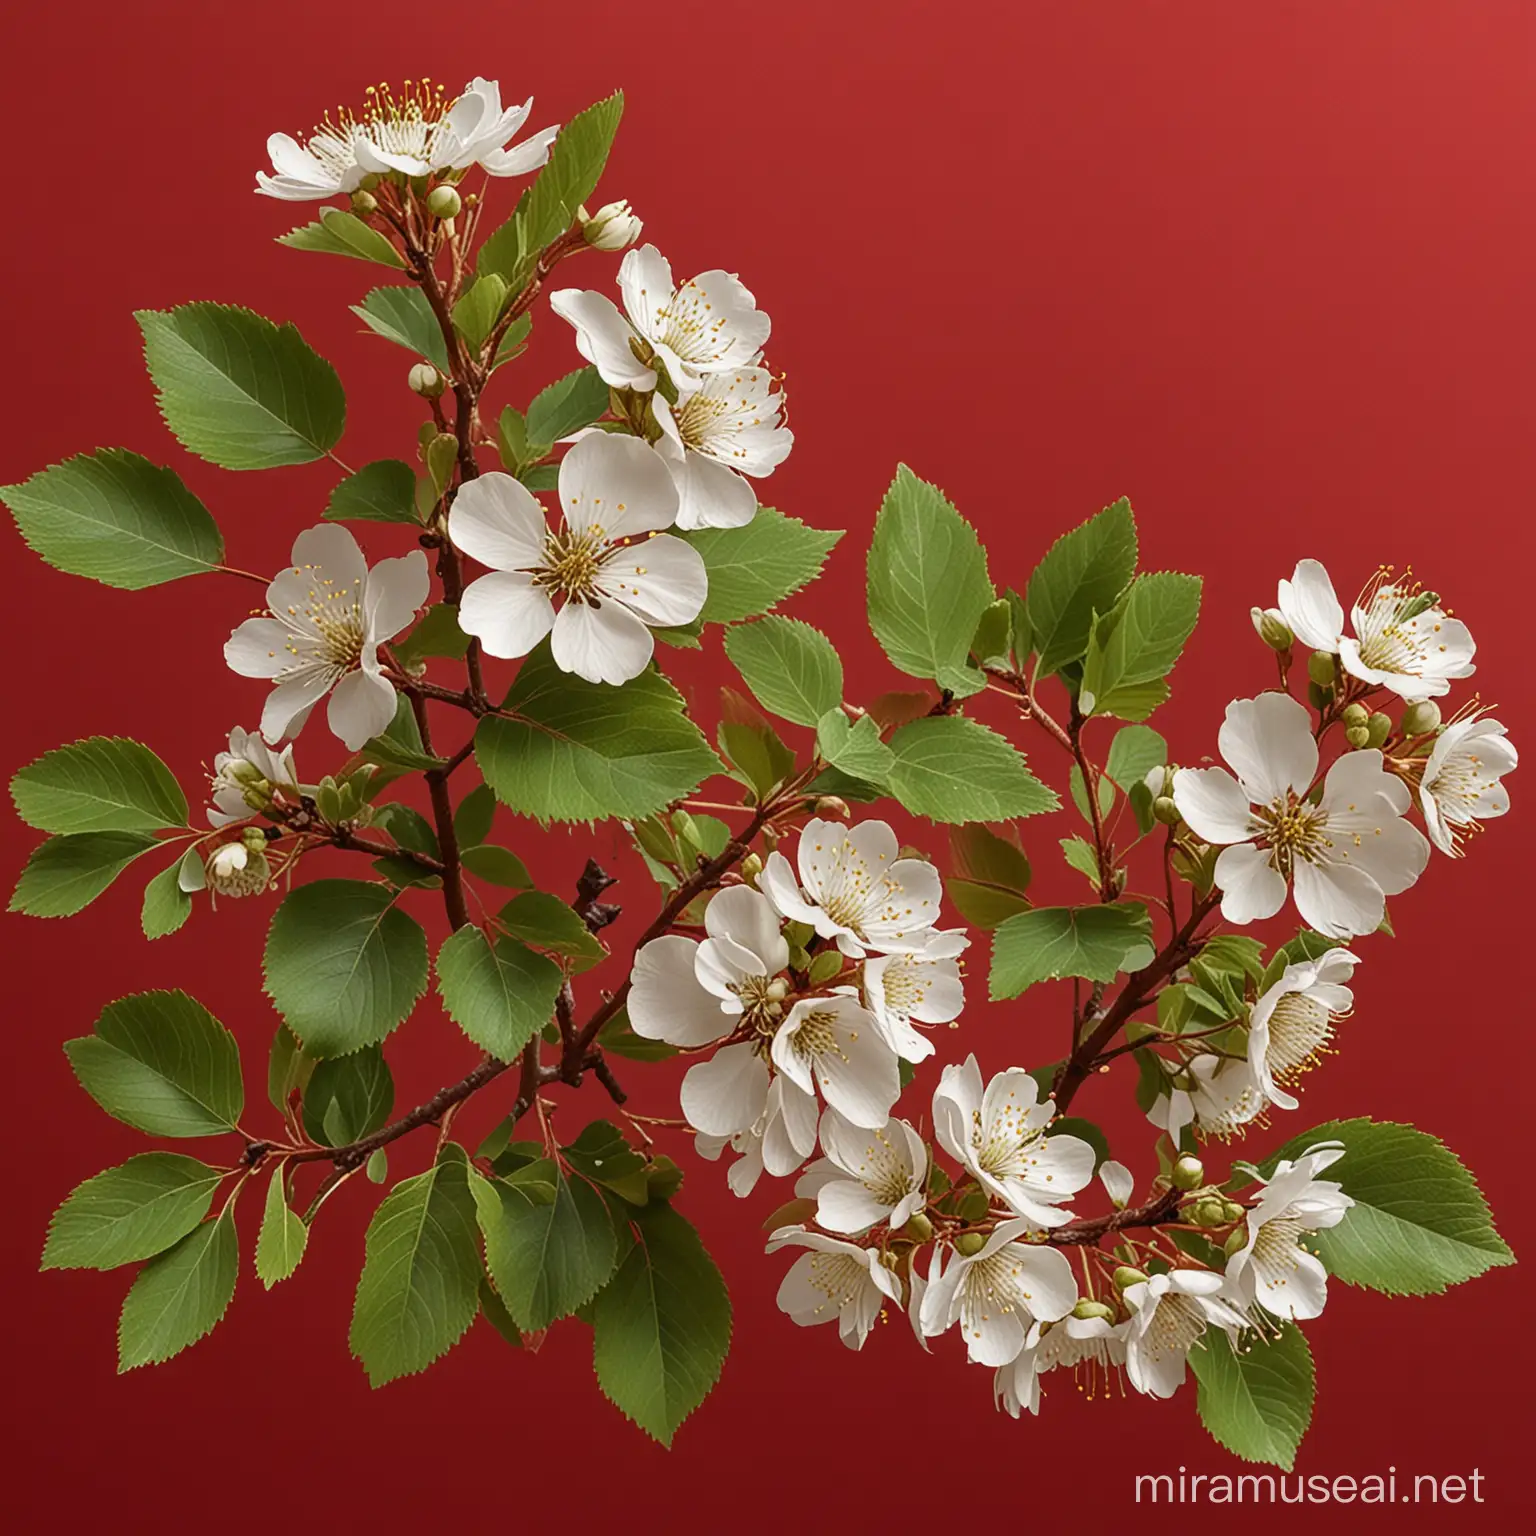 White Hawthorn Blossoms on a Vibrant Red Background